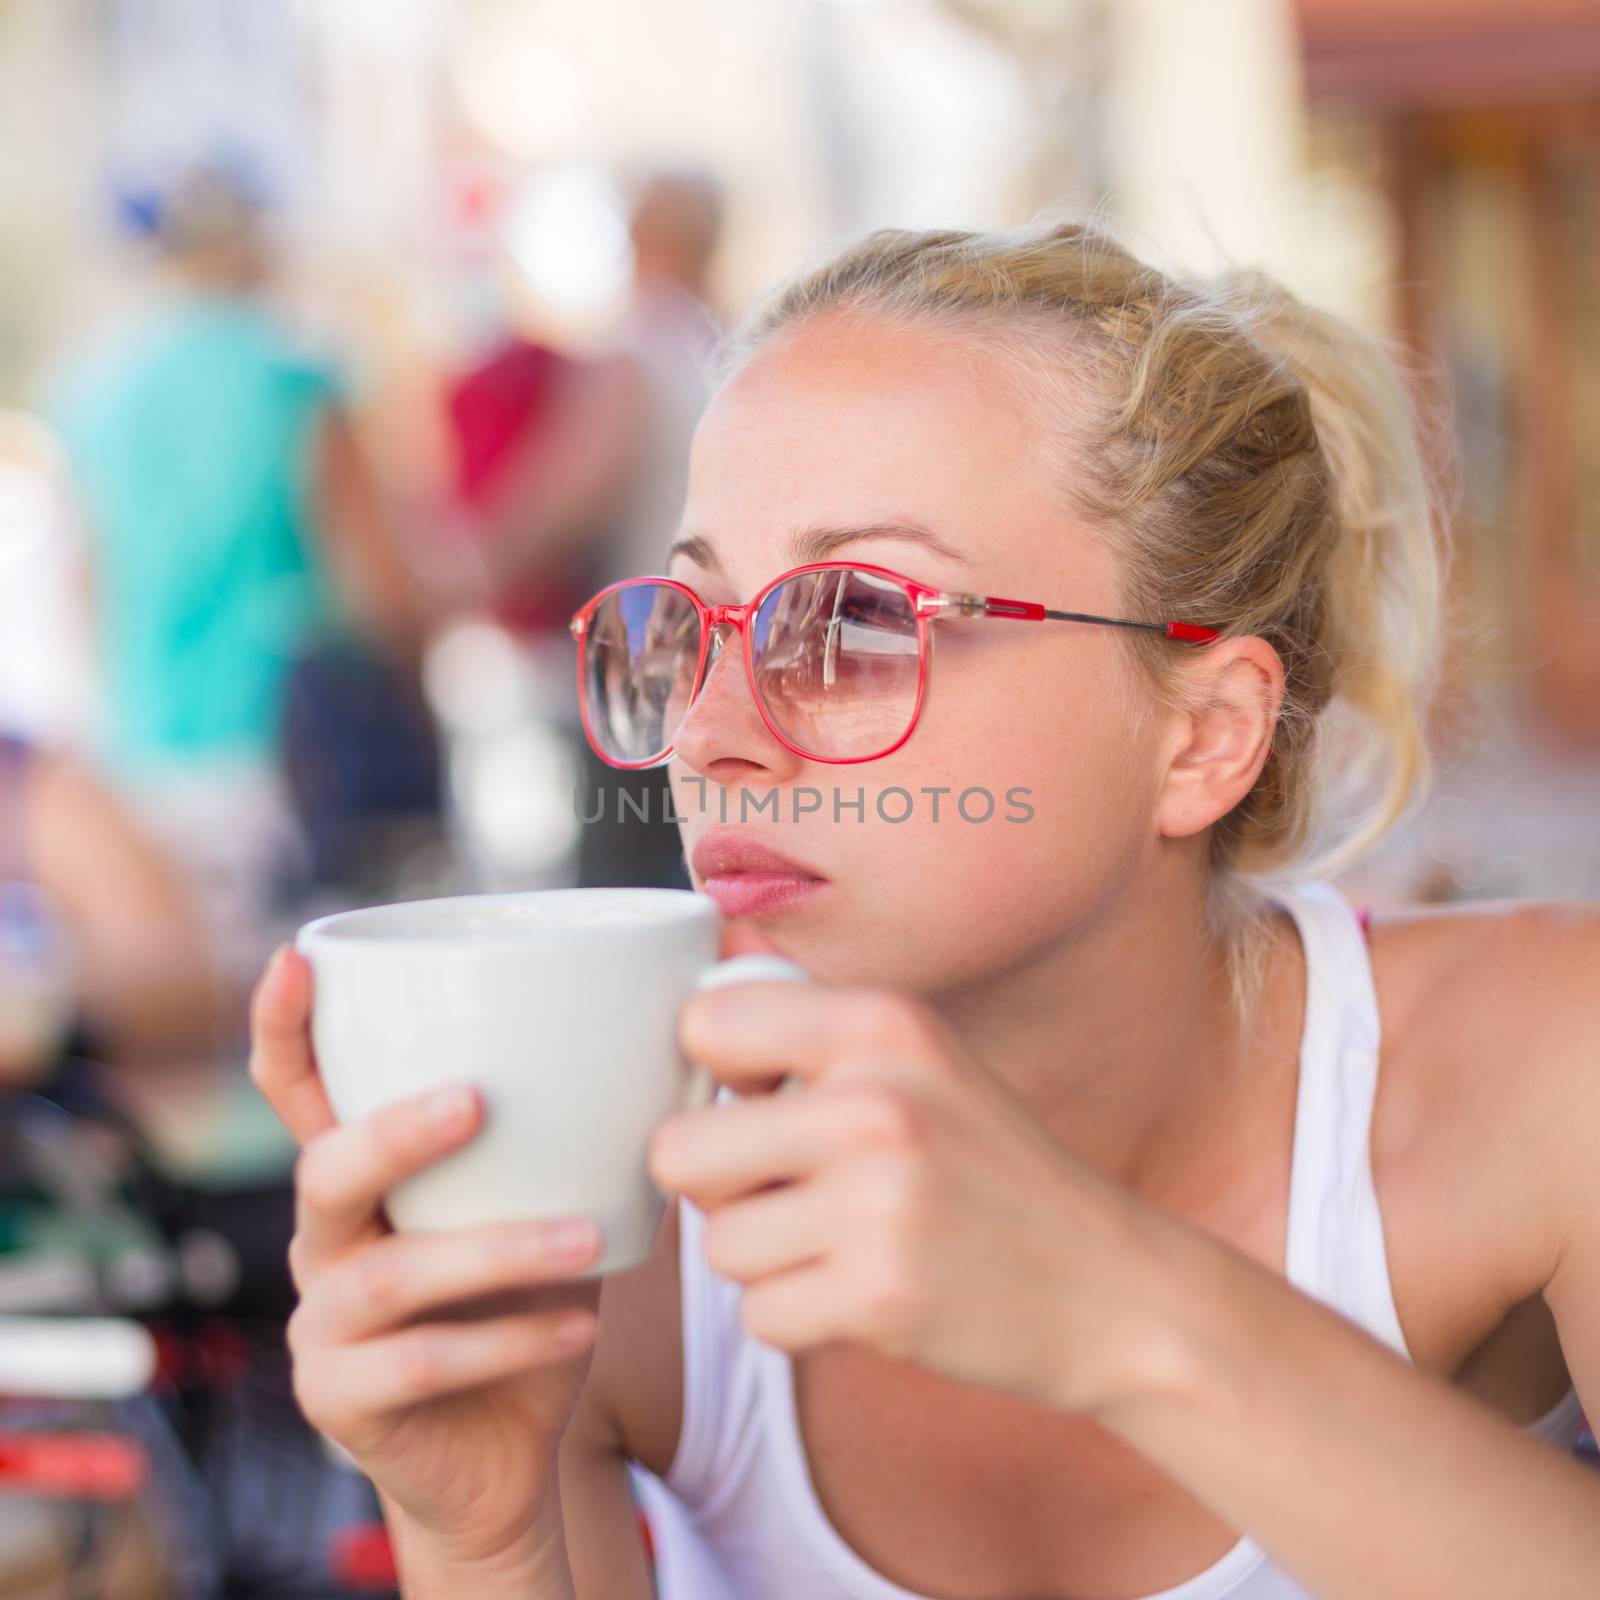 Calm casual blond lady enjoying cup of coffee outdoor in typical italian  street coffee house on warm summer day.